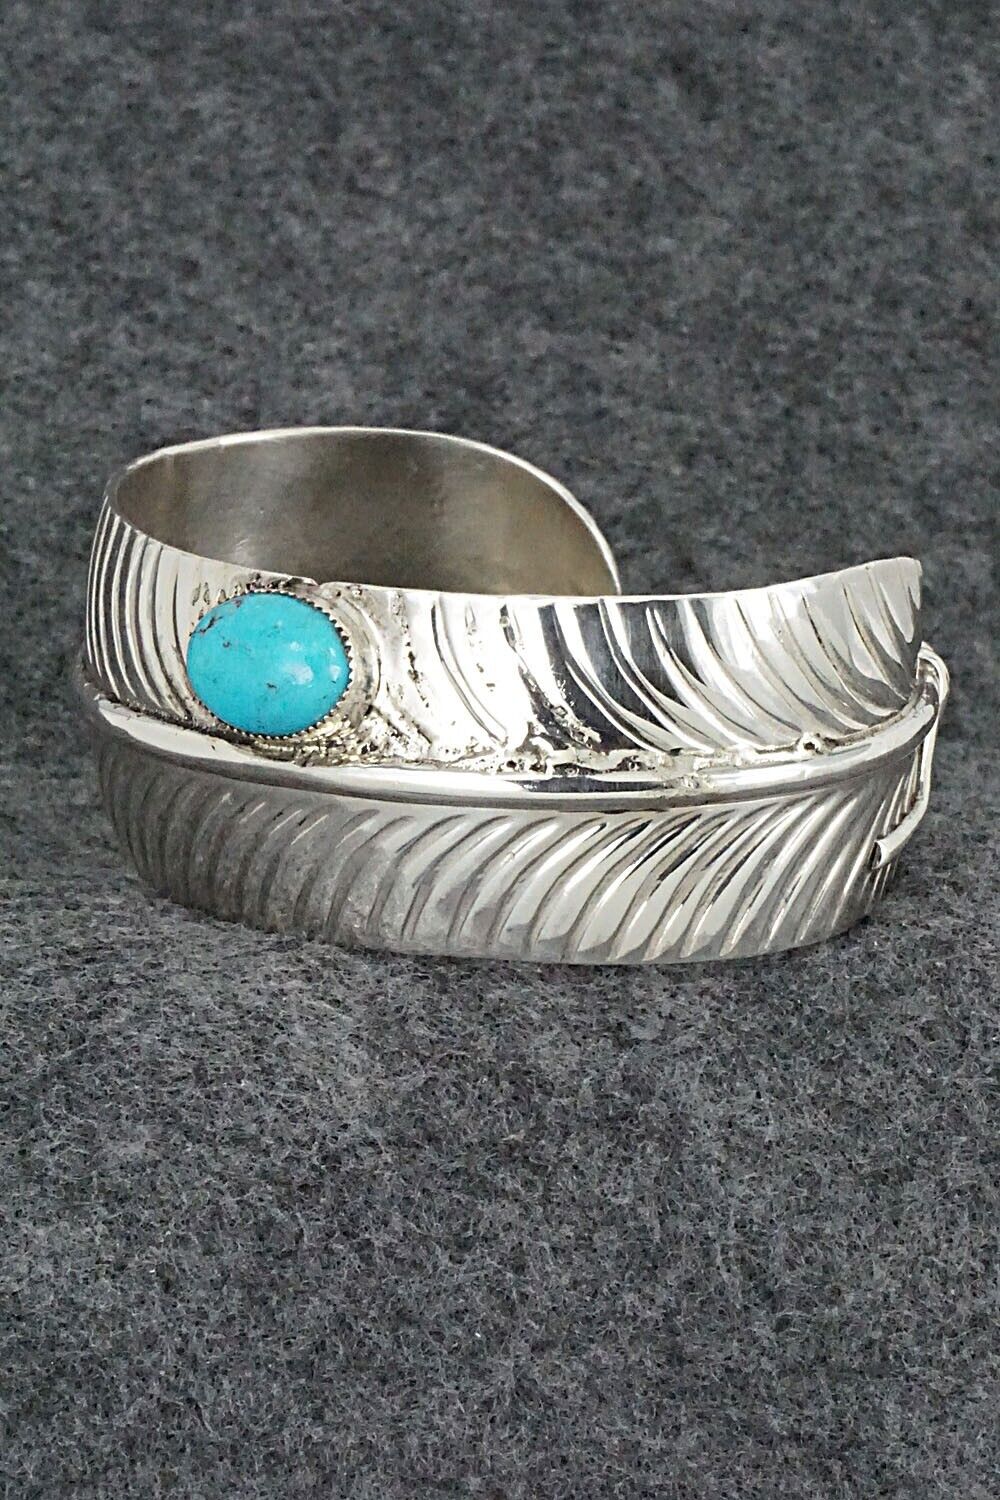 Turquoise and Sterling Silver Bracelet - Aaron Davis